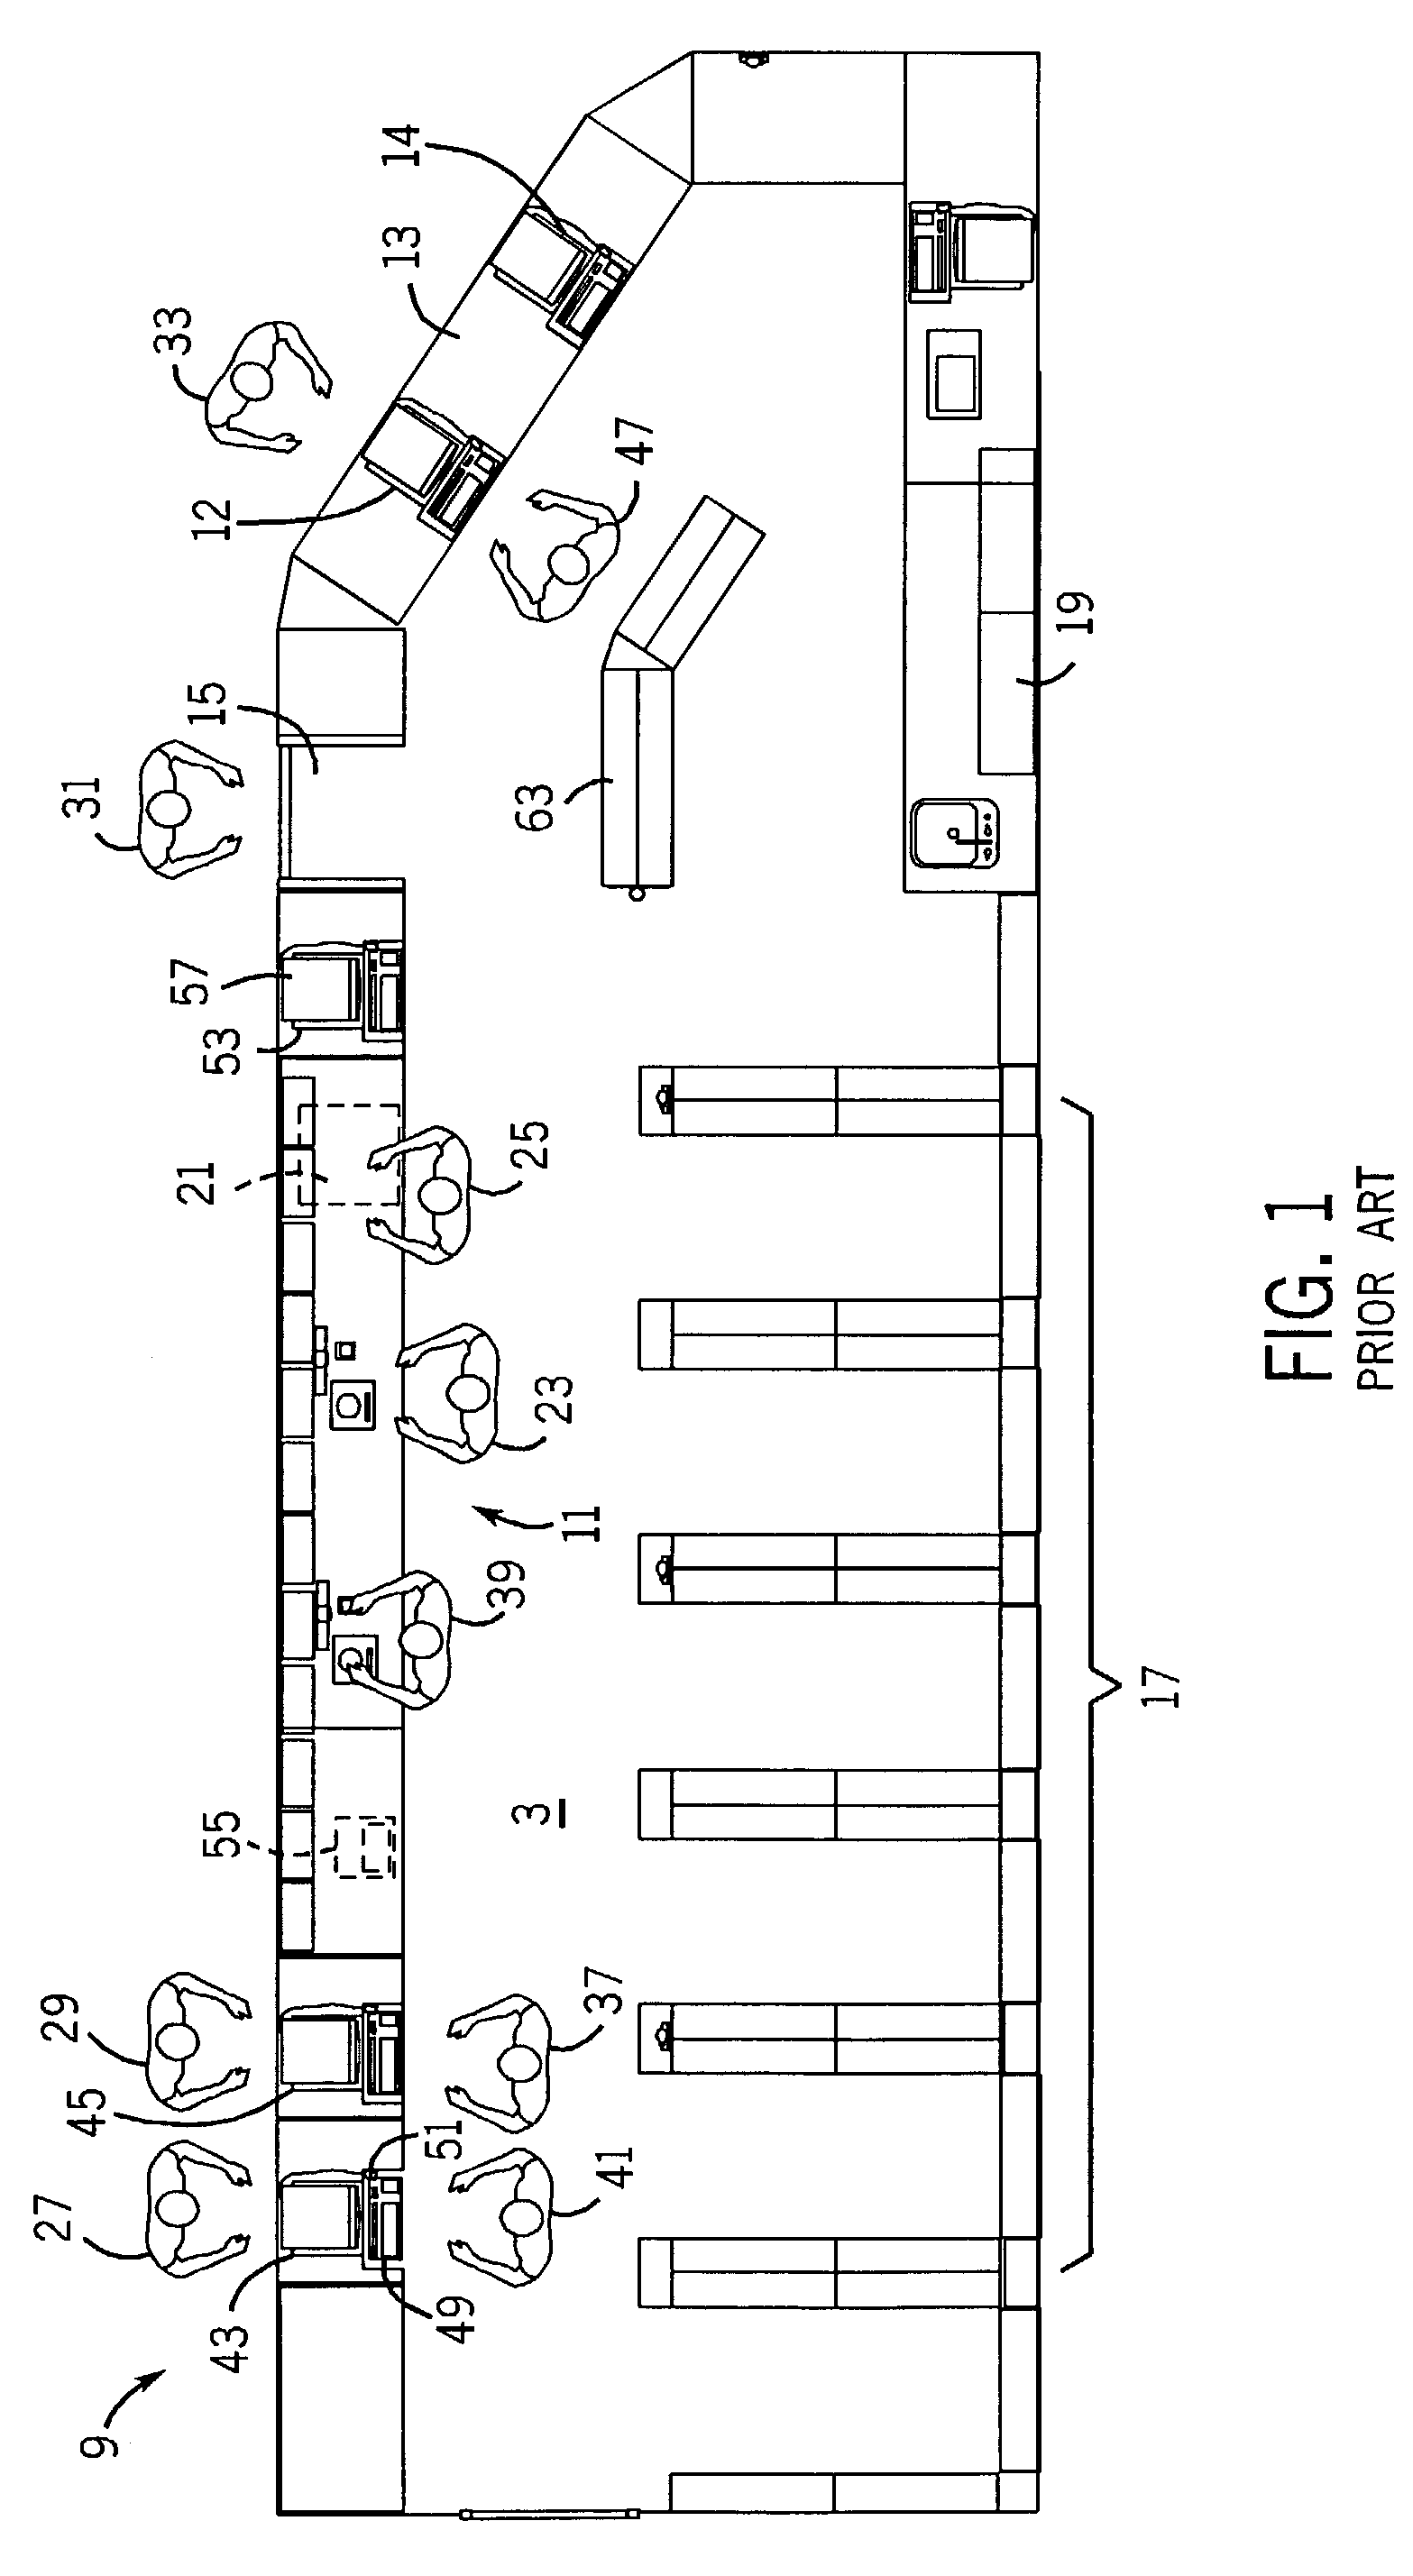 System and method for management of pharmacy workflow